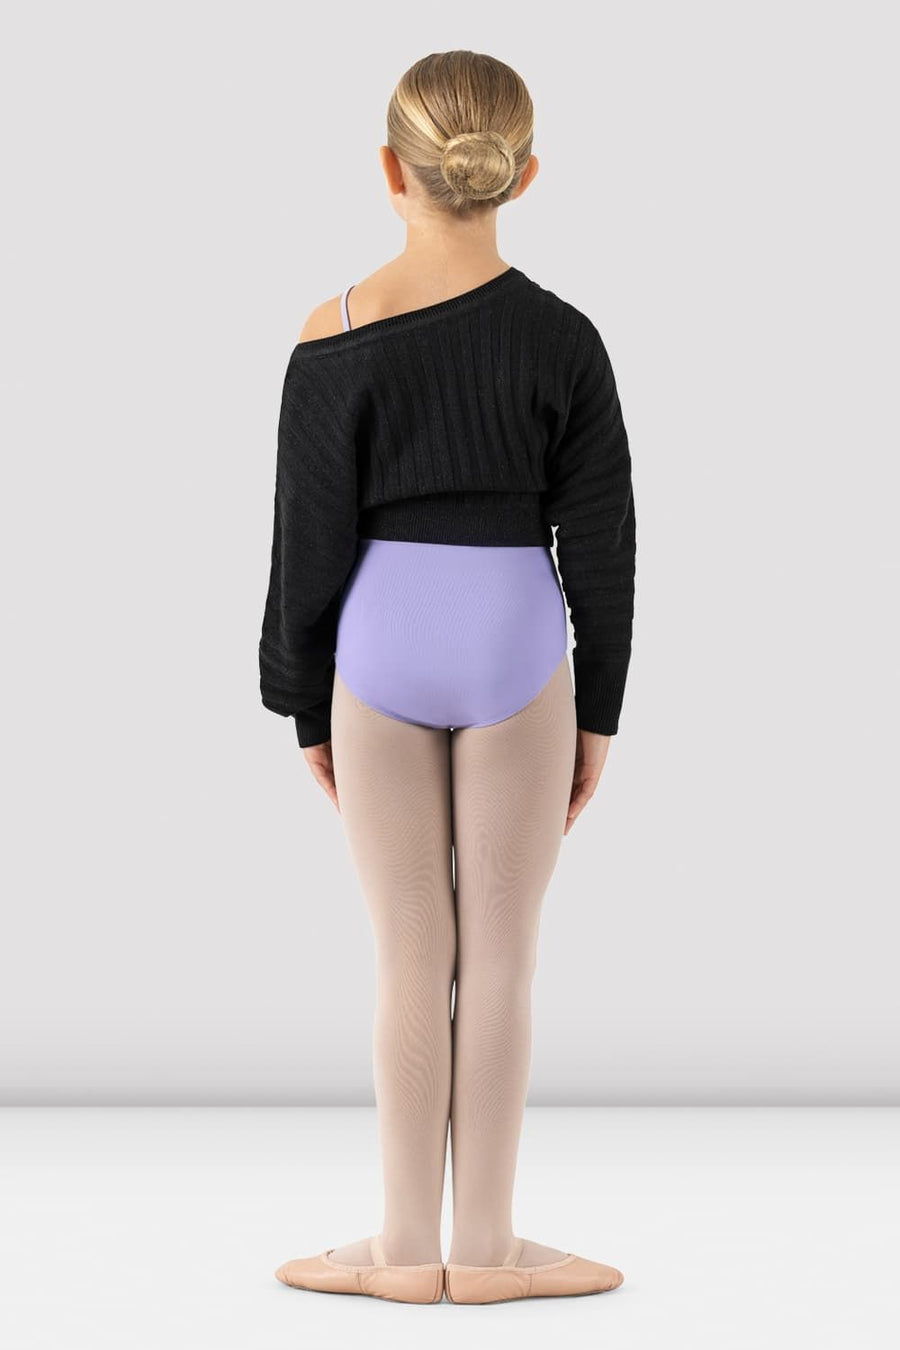 Bloch Child Knitted Cropped Sweater